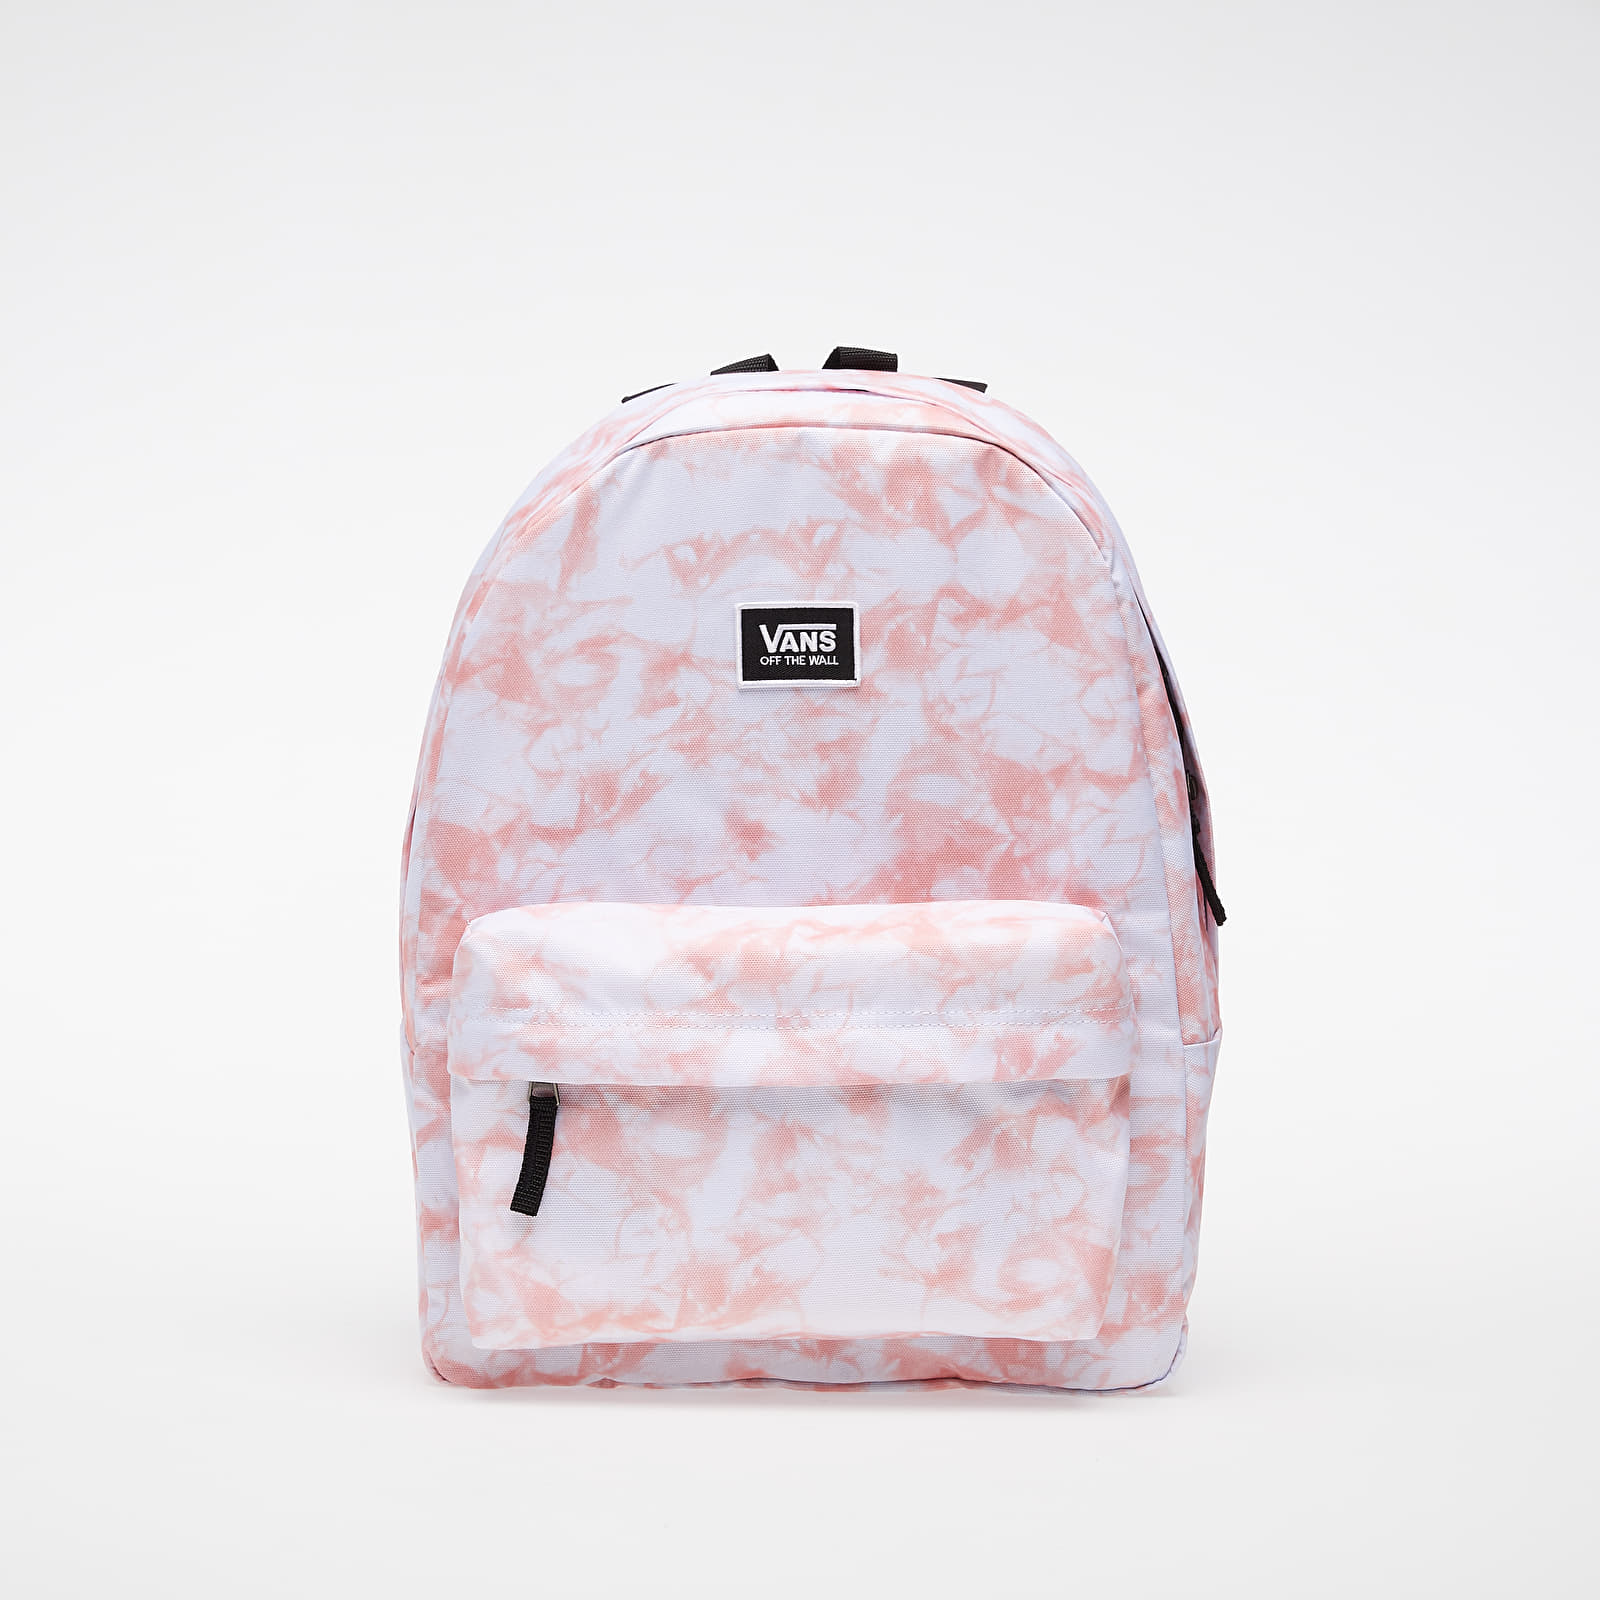 Sacs à dos Vans Realm Classic Backpack Pink Icing